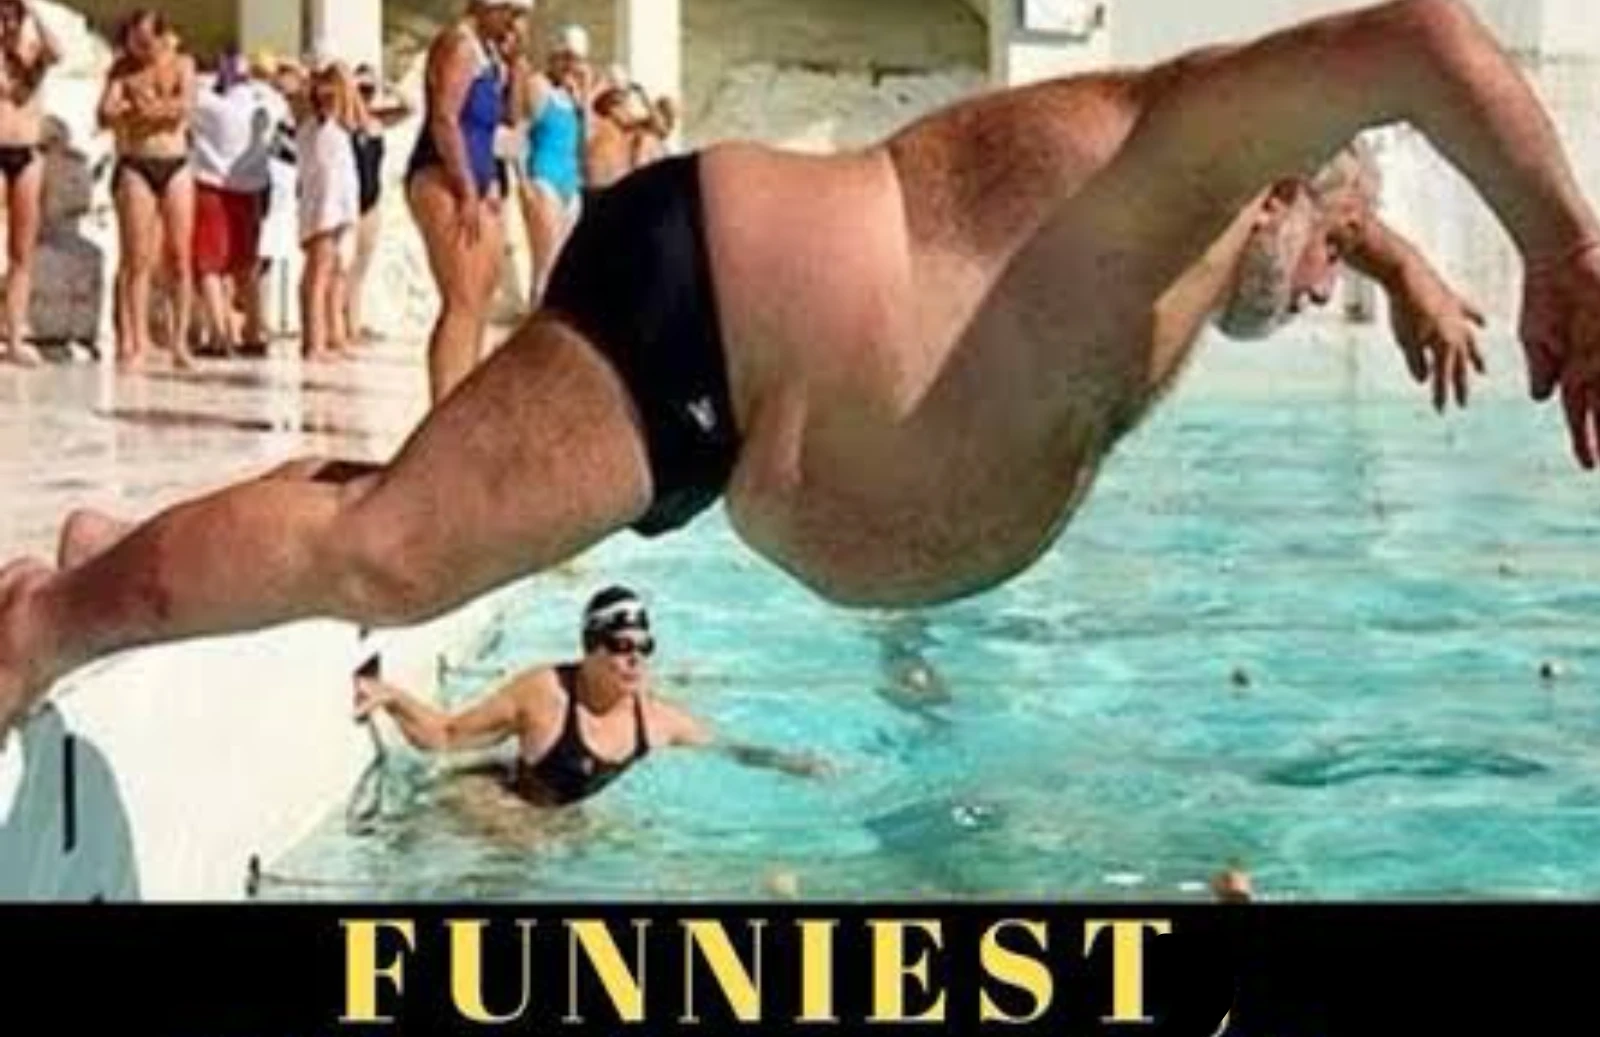 Hilarious Fails: The Funniest Moments Caught on Camera